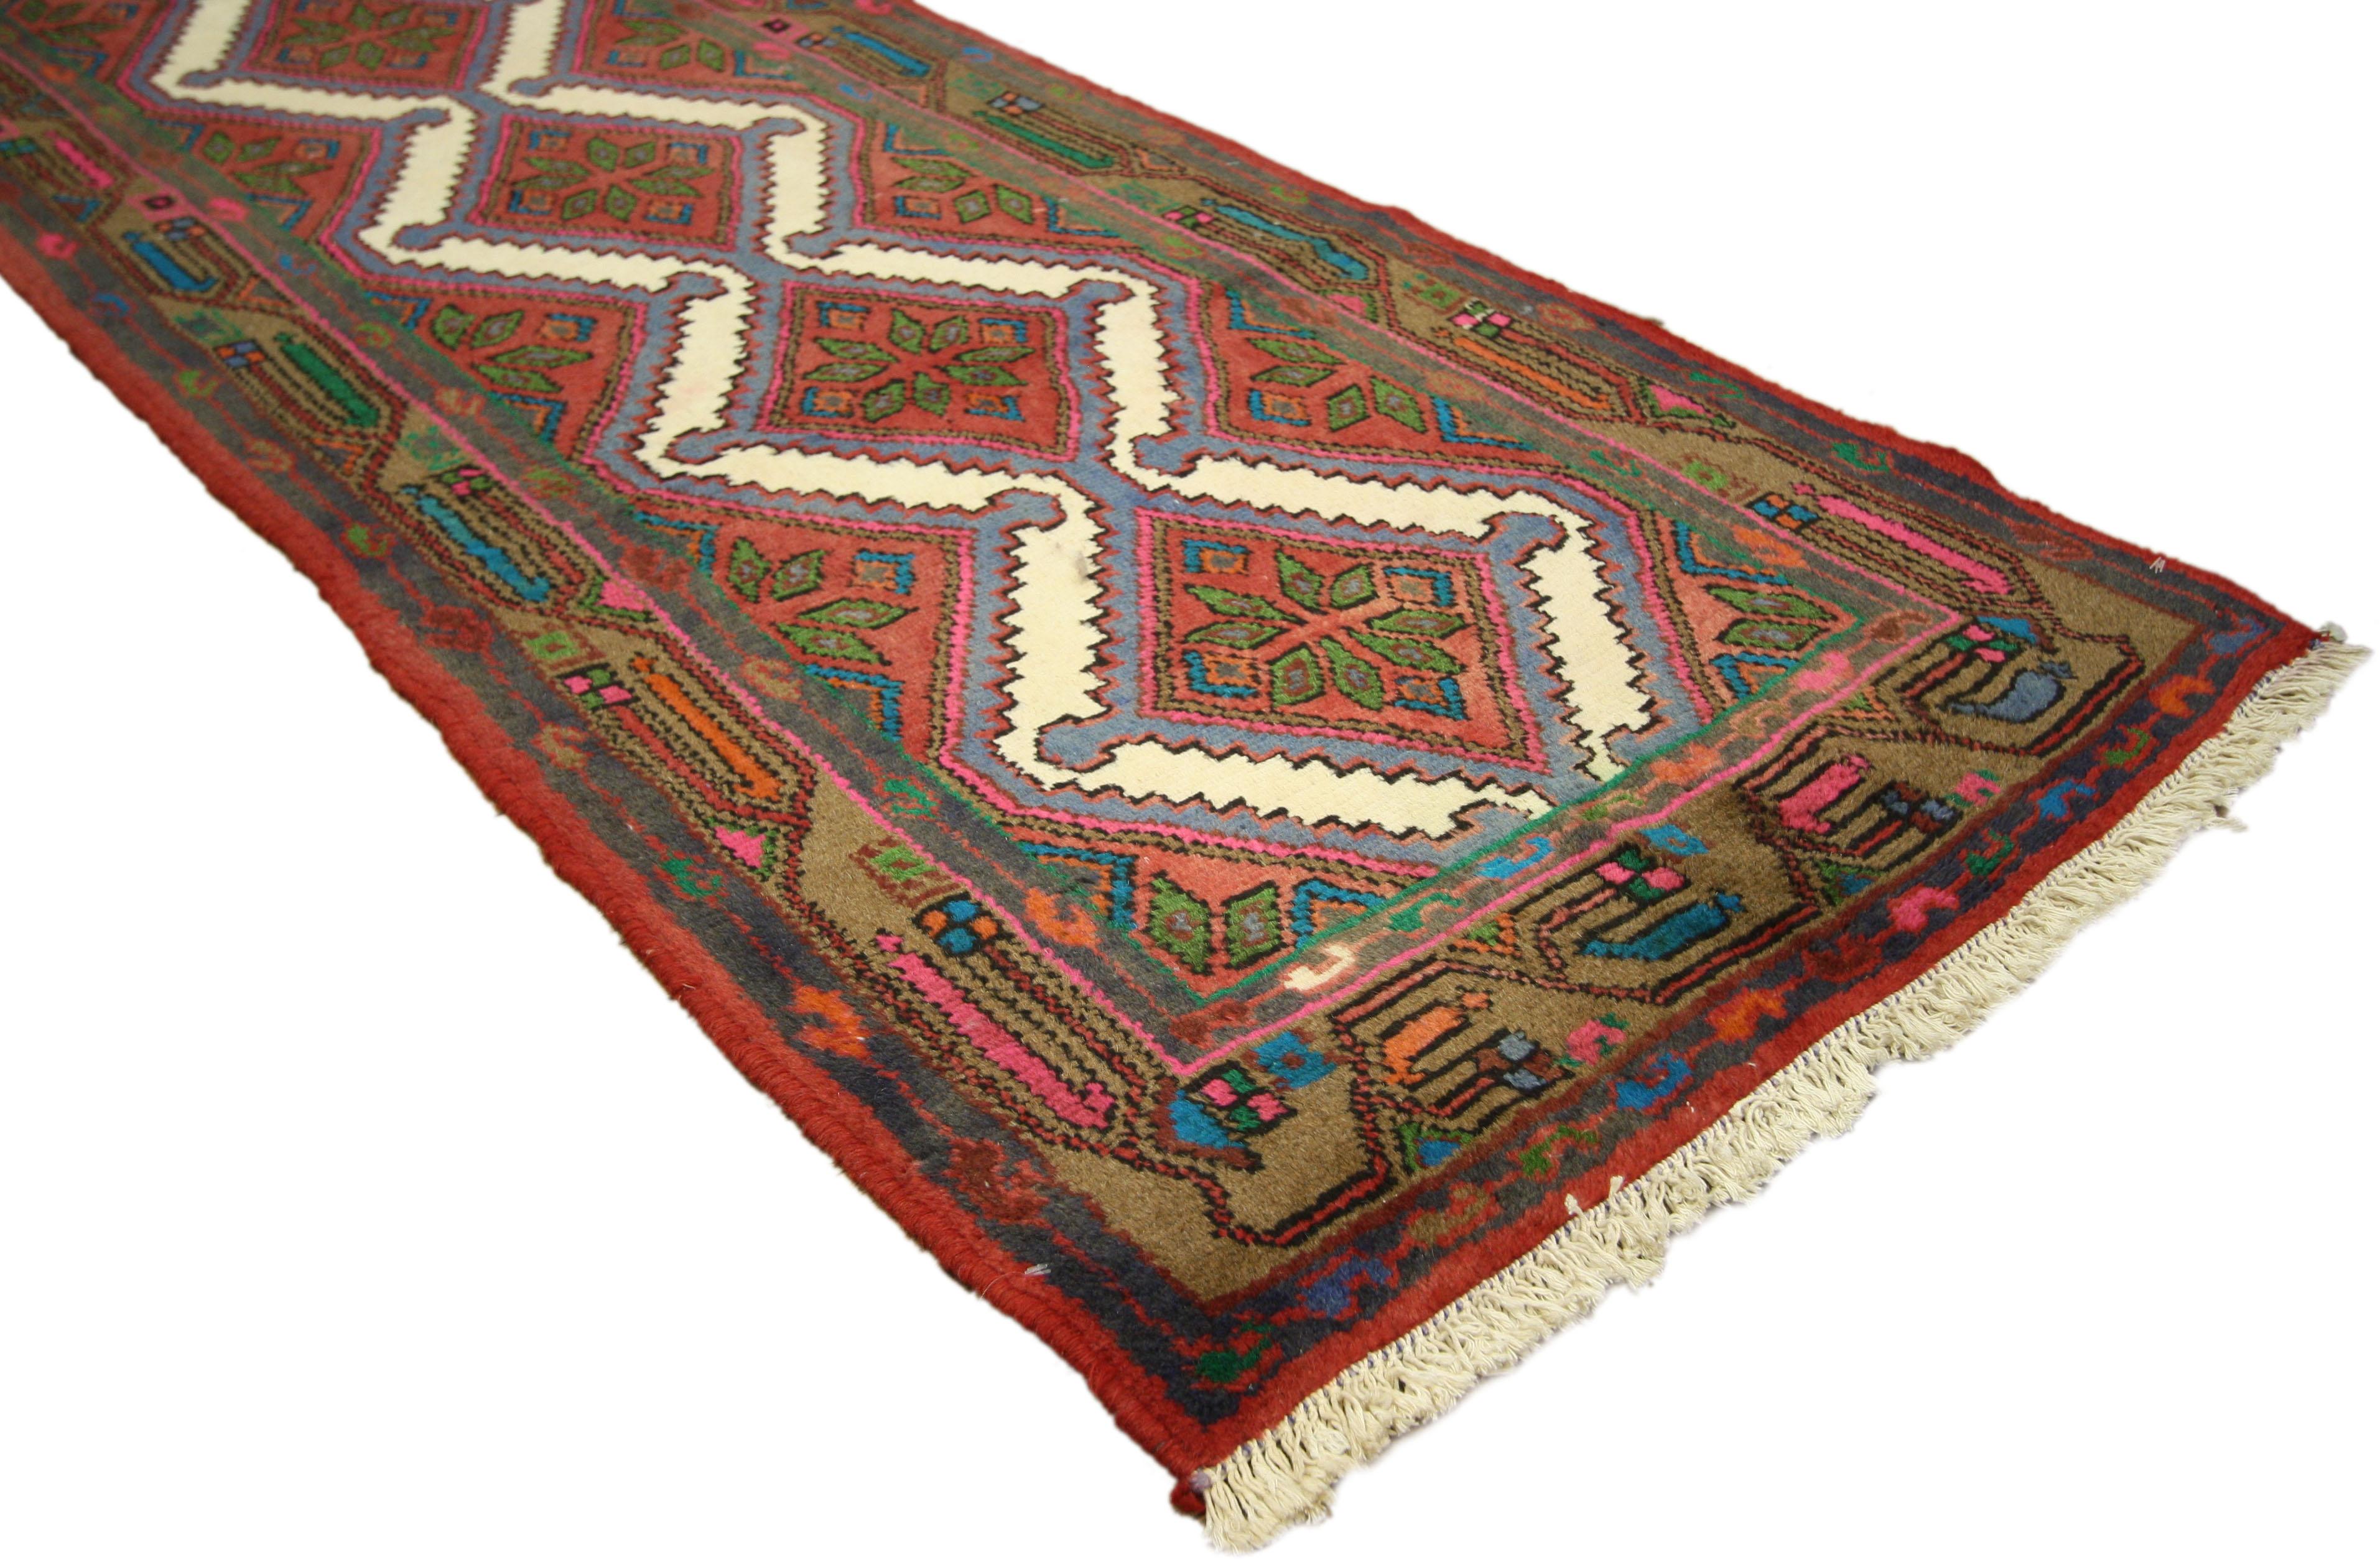 60223 Jacobean Style Vintage Persian Hamadan Runner, Hallway Runner Vintage hand-knotted wool Persian Hamadan runner featuring stacked medallions surrounded by geometric motifs and framed with a colorful tribal border. Rendered in traditional colors